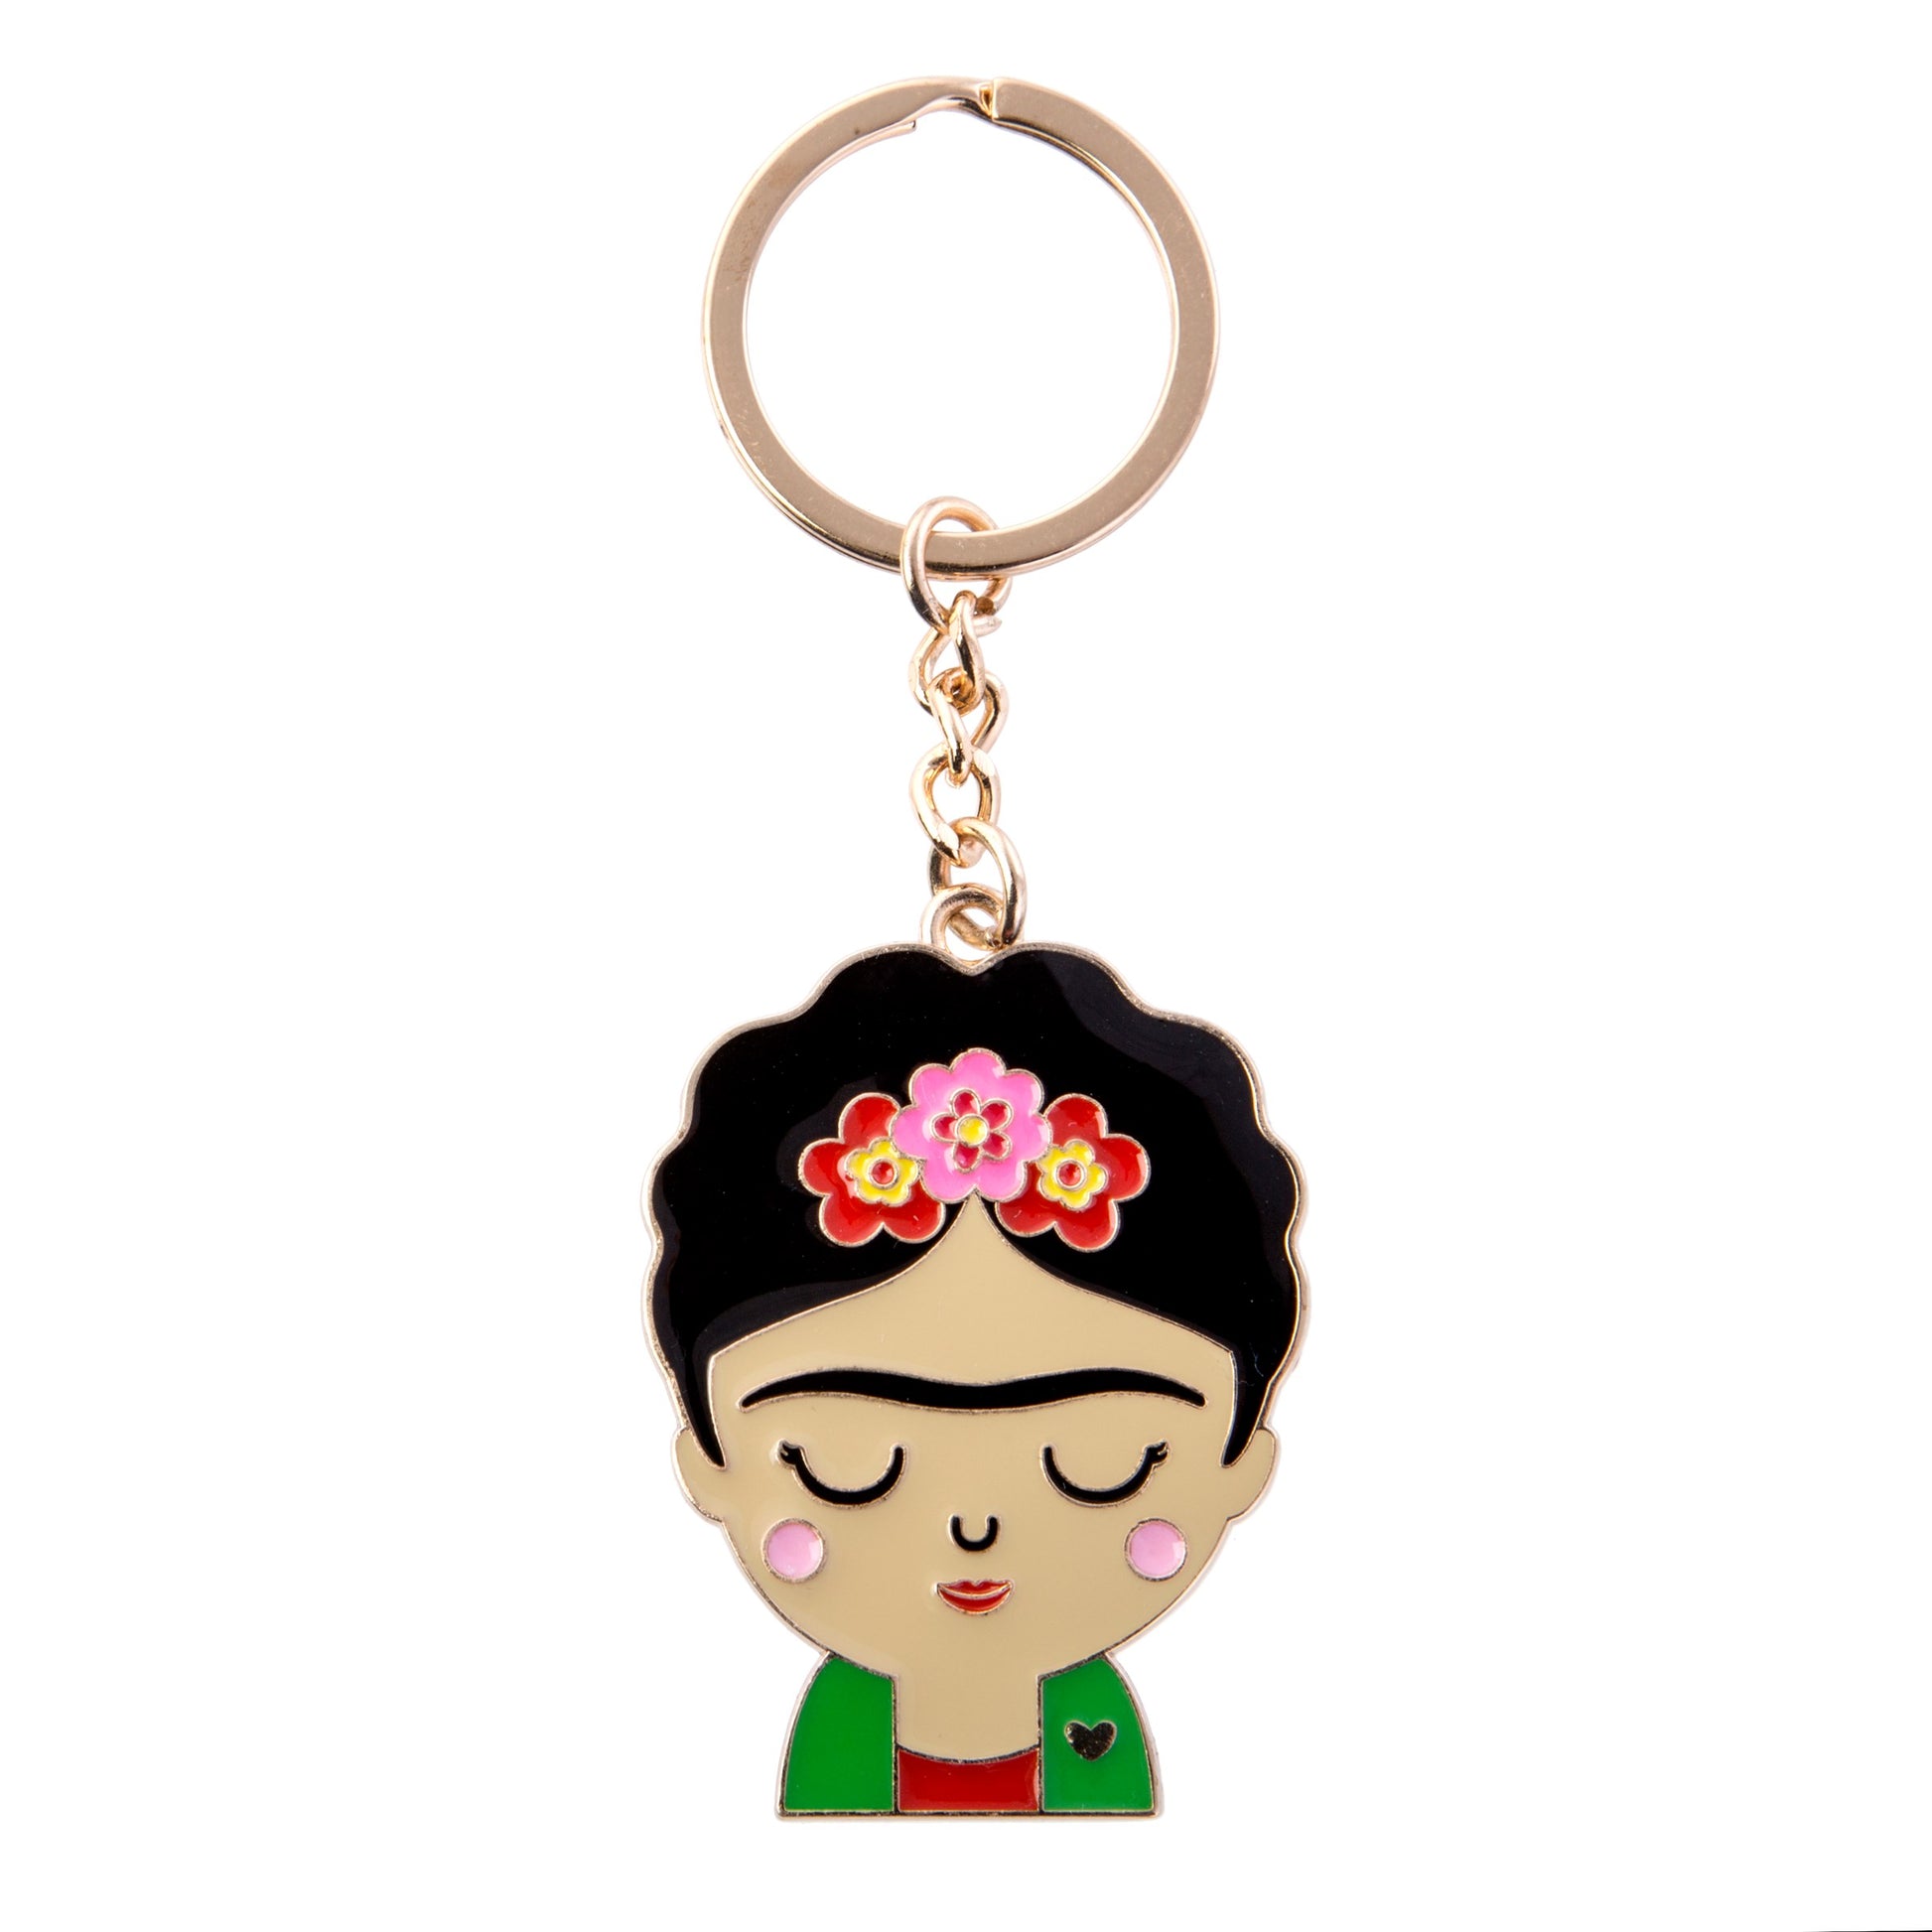 Keyring featuring Frida Kahlo and reflecting the vibrant culture of Mexico.